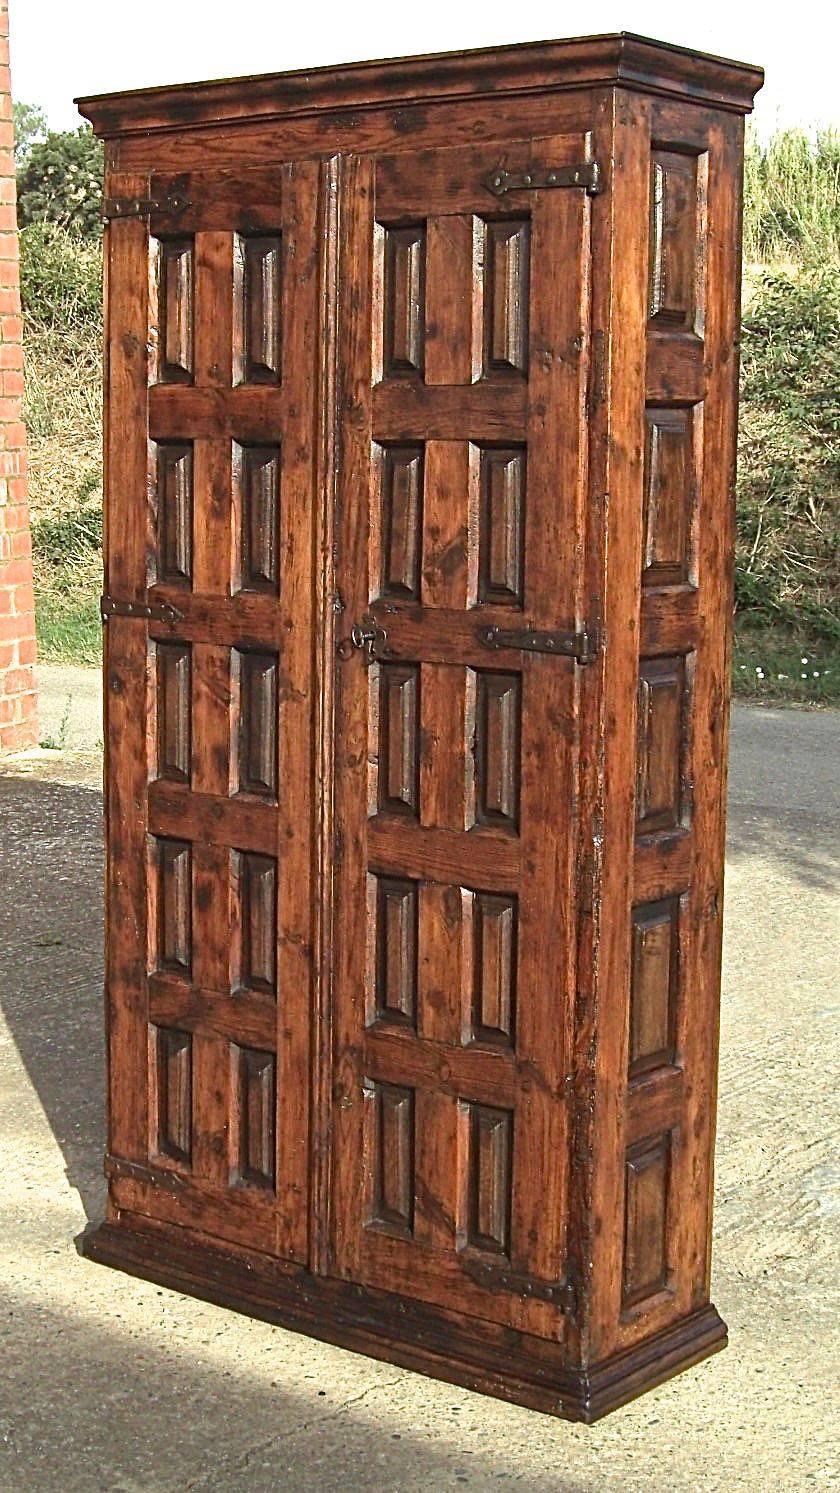 A lovely early 18th century mixed-wood pantry cabinet from the medieval market town of Najera located along the Camino de Santiago in northern Spain's Rioja wine region.

With a honey pine structure, carved oak panels, a solid walnut plank back